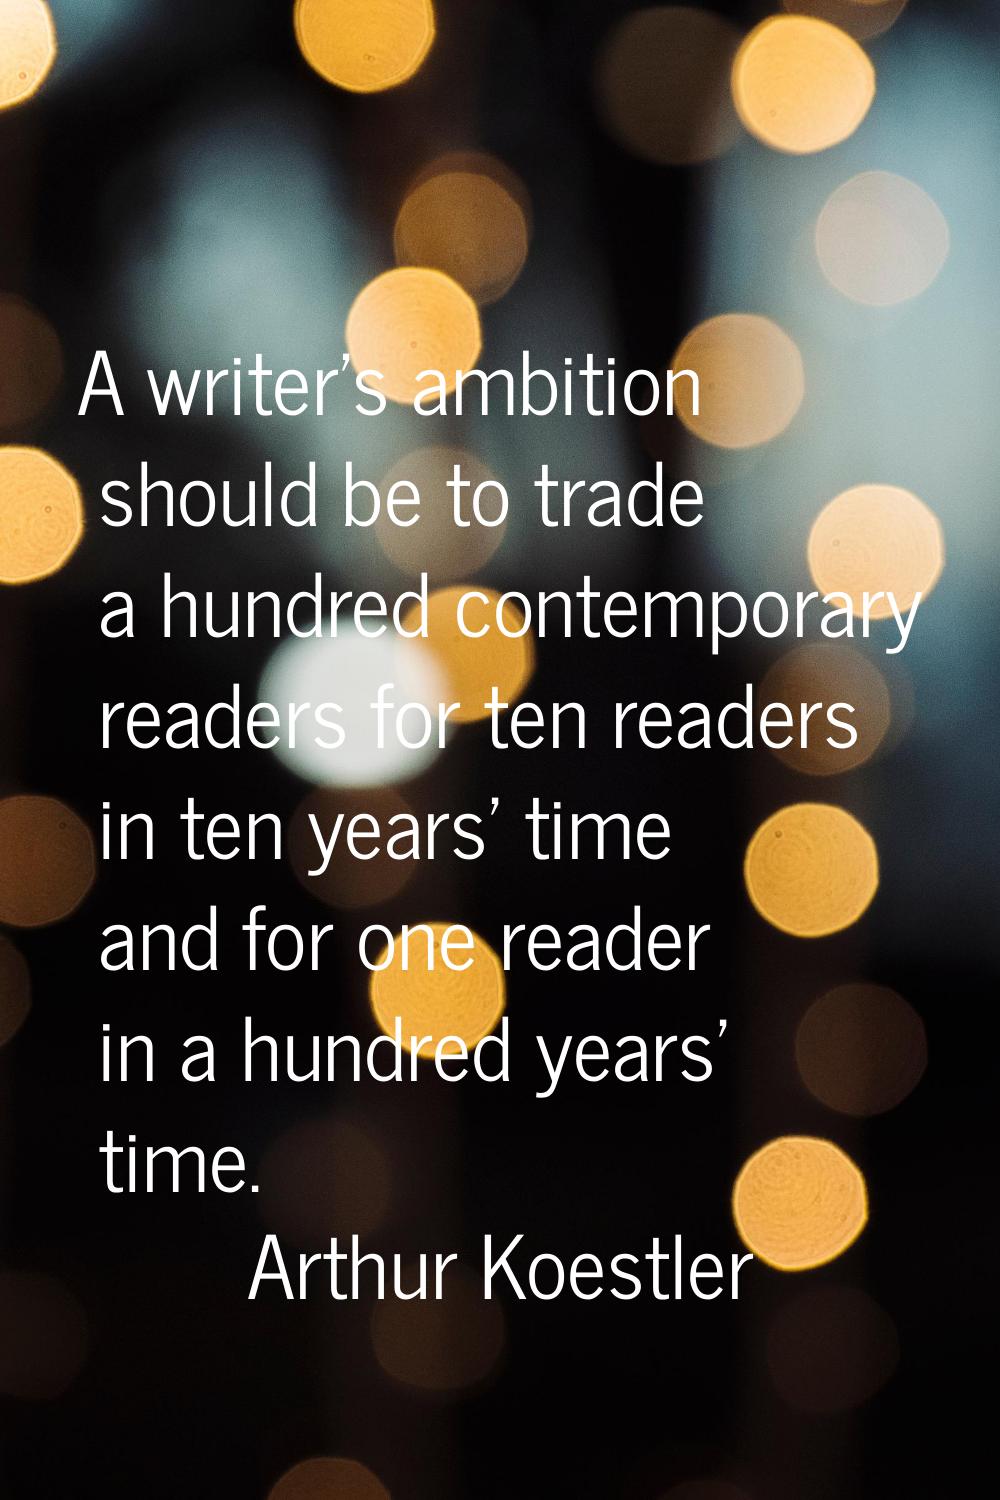 A writer's ambition should be to trade a hundred contemporary readers for ten readers in ten years'